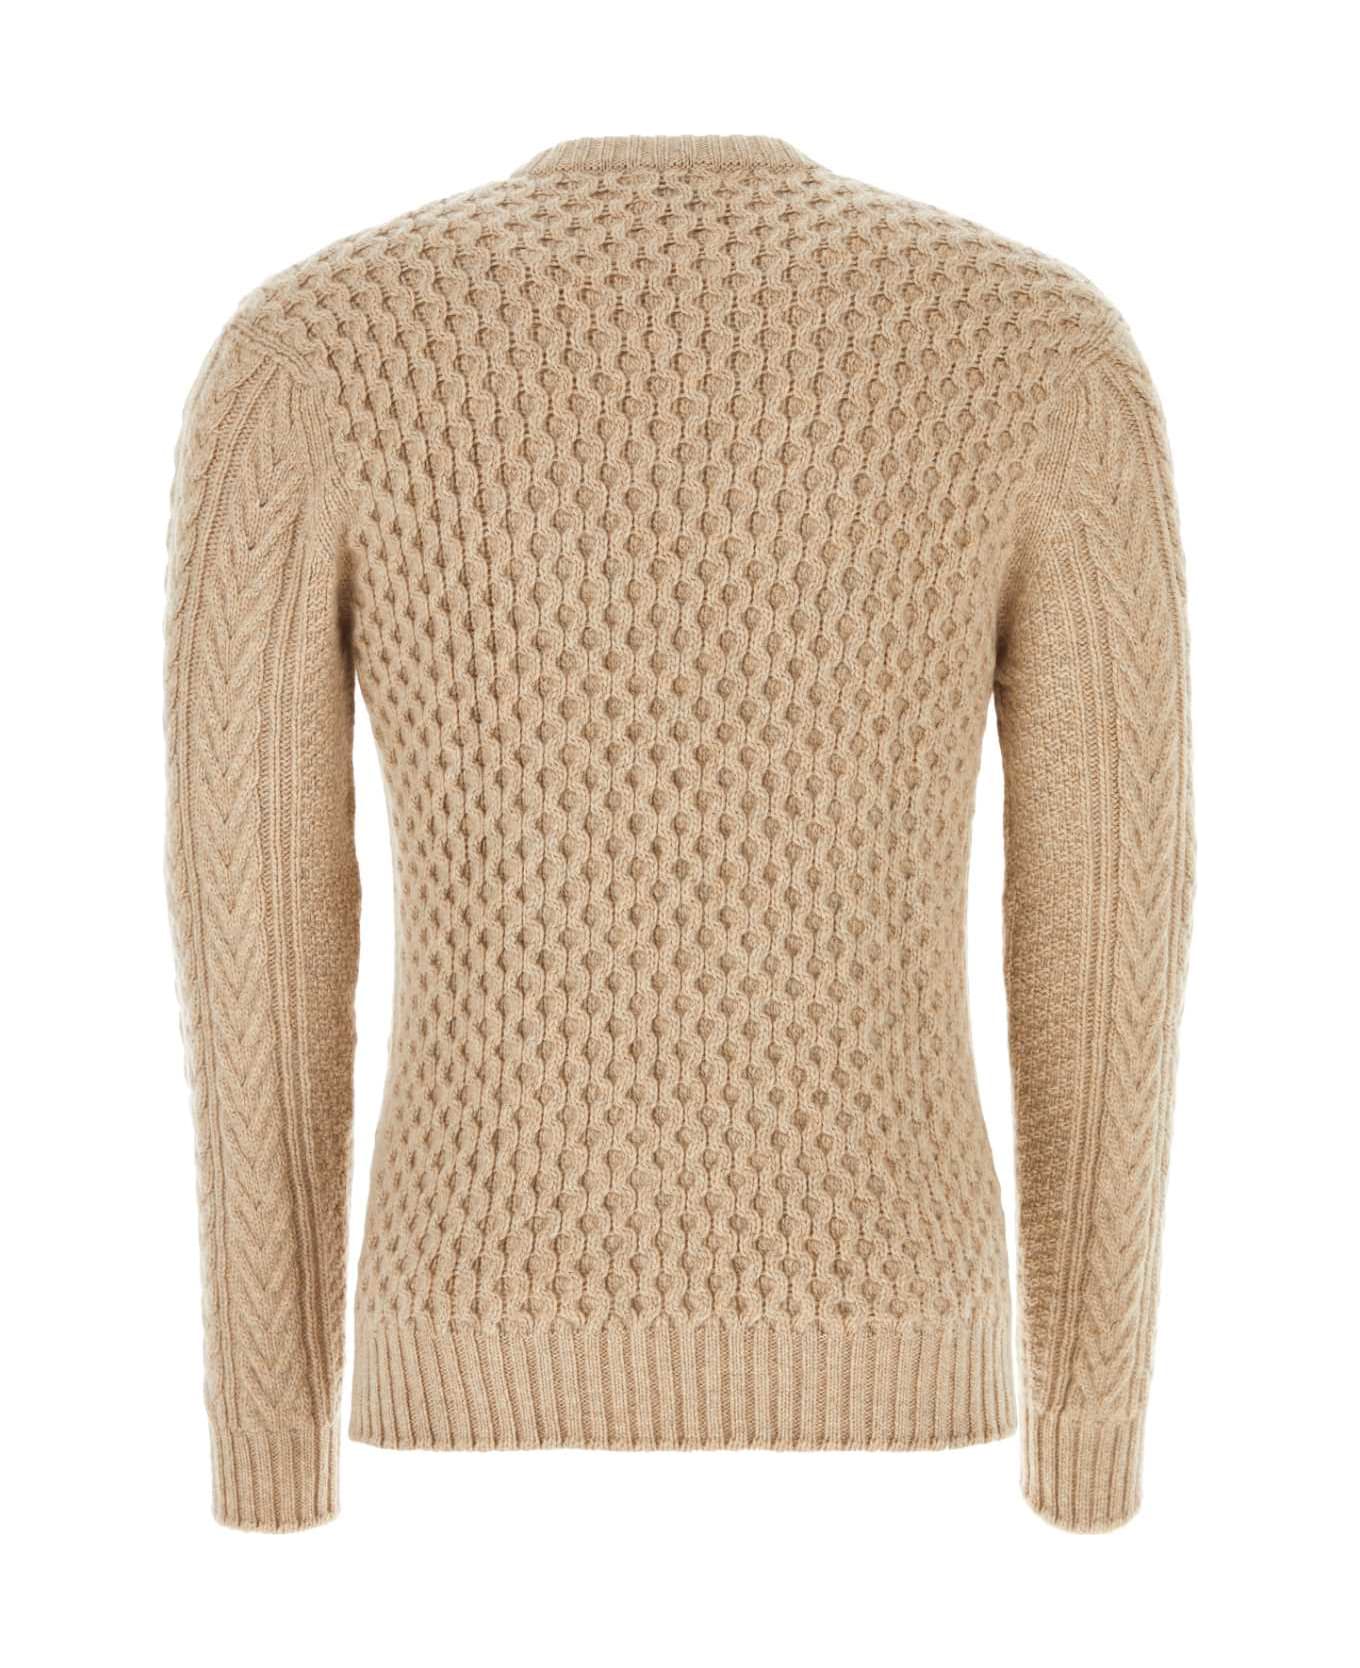 Johnstons of Elgin Beige Cashmere Sweater - OATMEAL